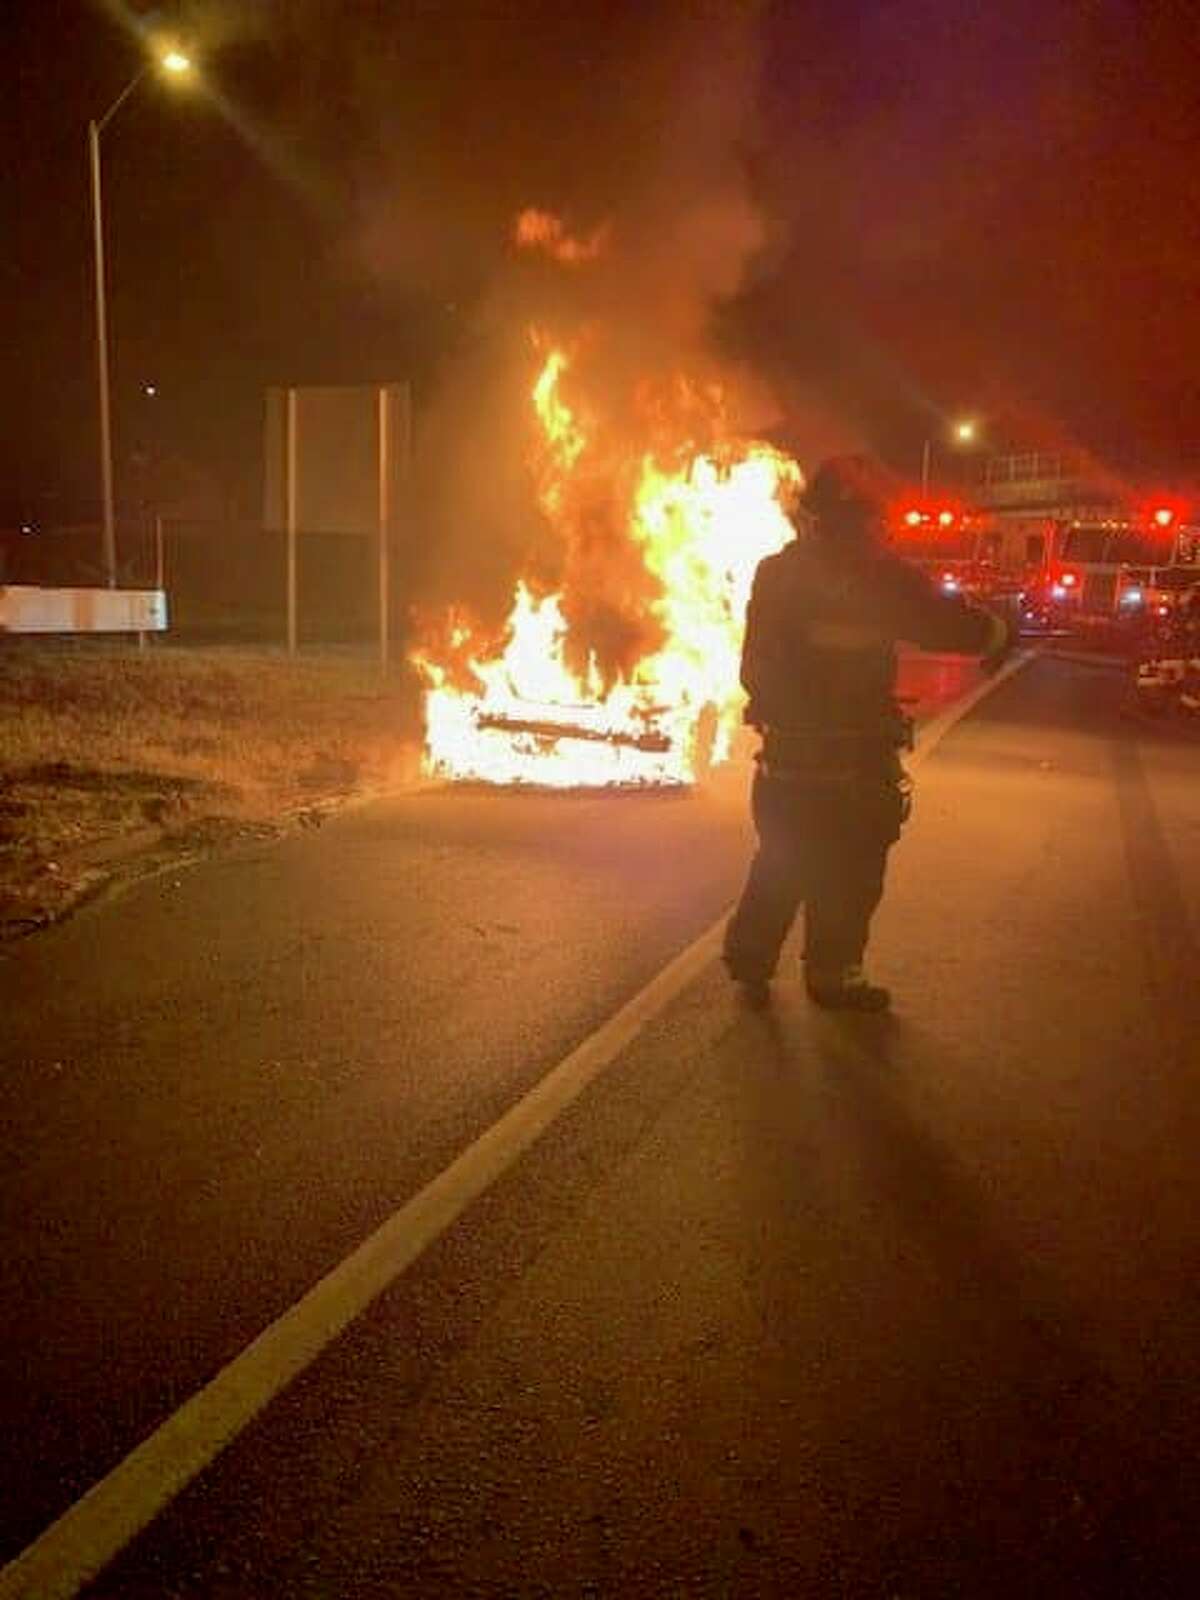 Authorities are investigating the cause of a fire that engulfed a car on the shoulder of I-95 early Monday morning, according to Fairfield fire officials.